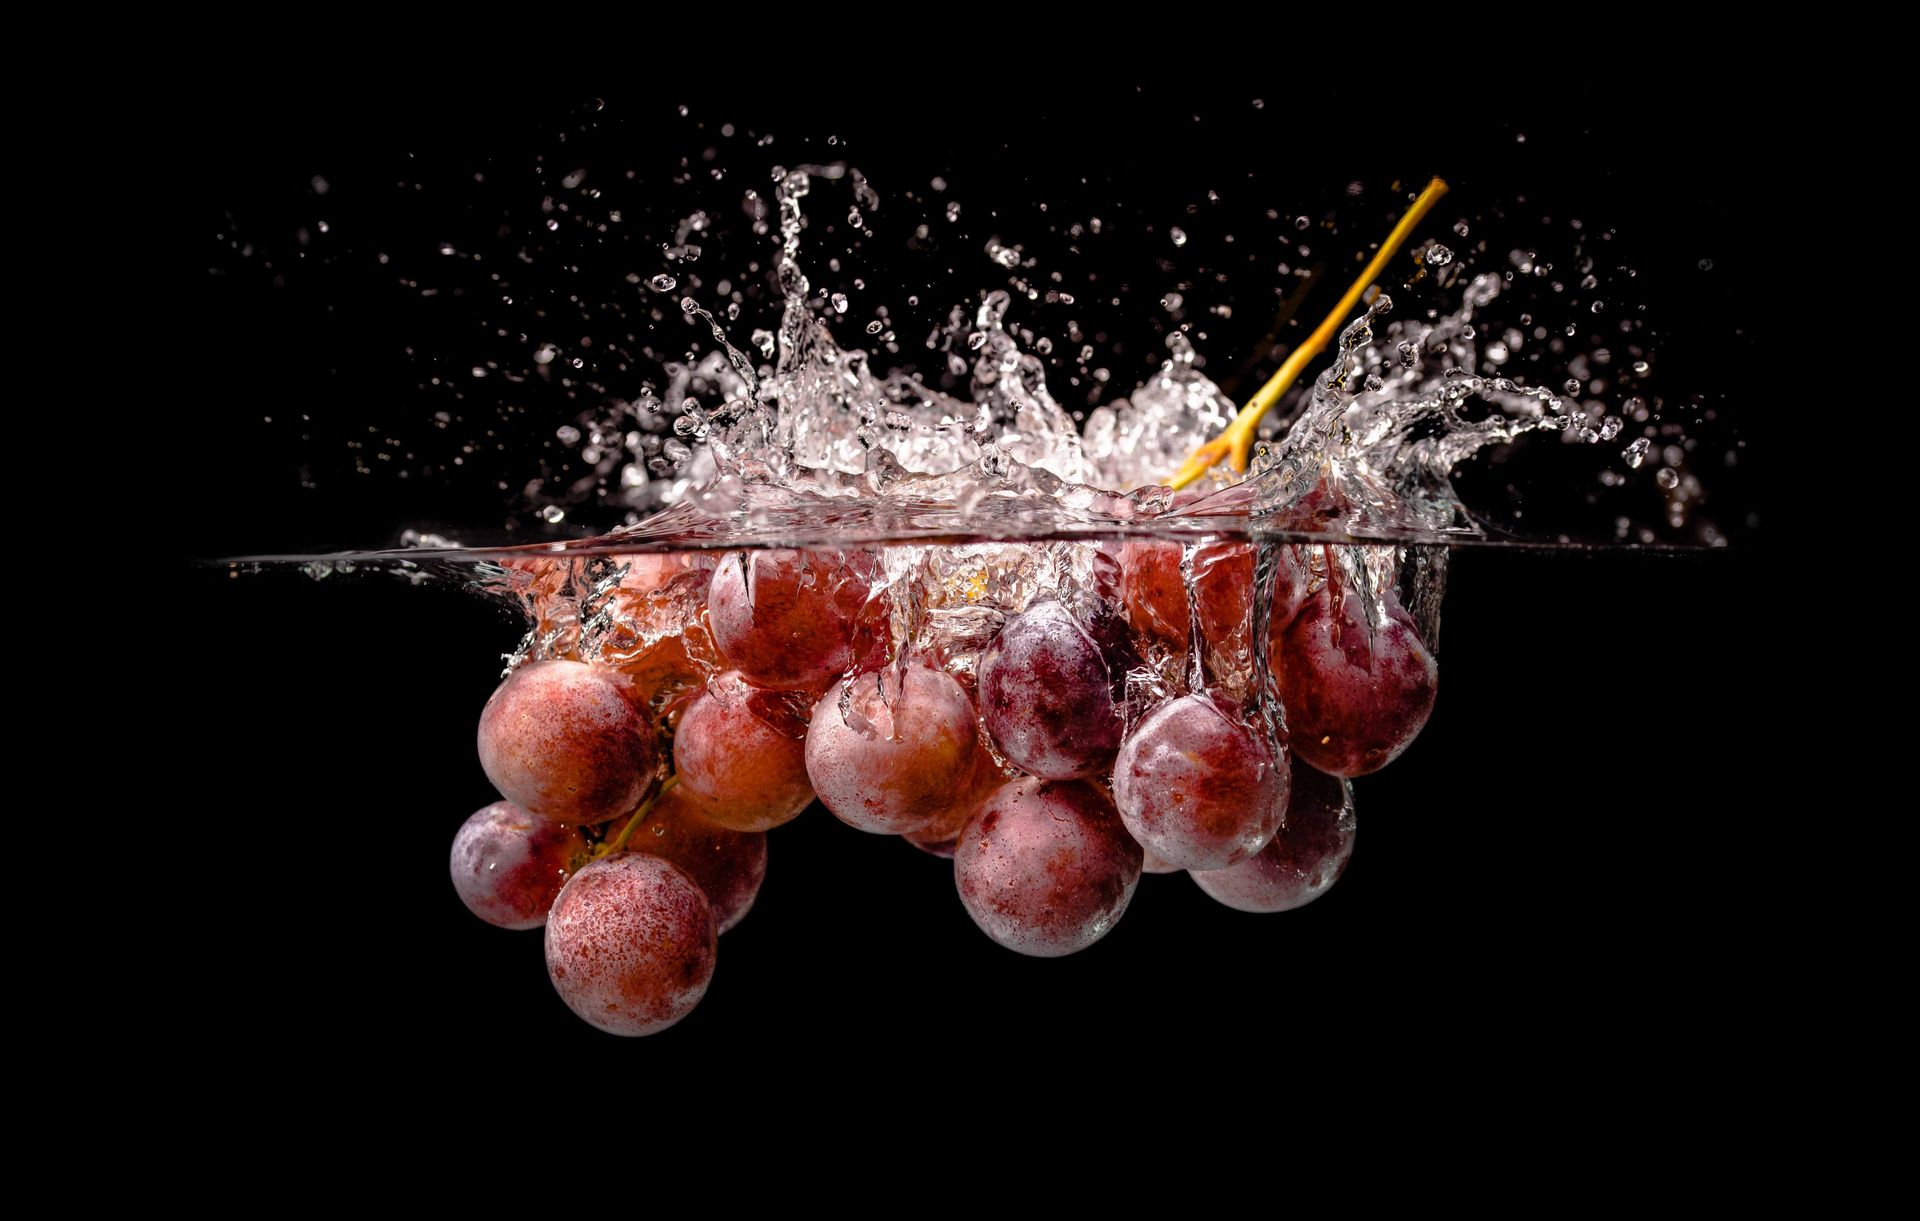 Professional Photograph of Grapes Splashing in Water